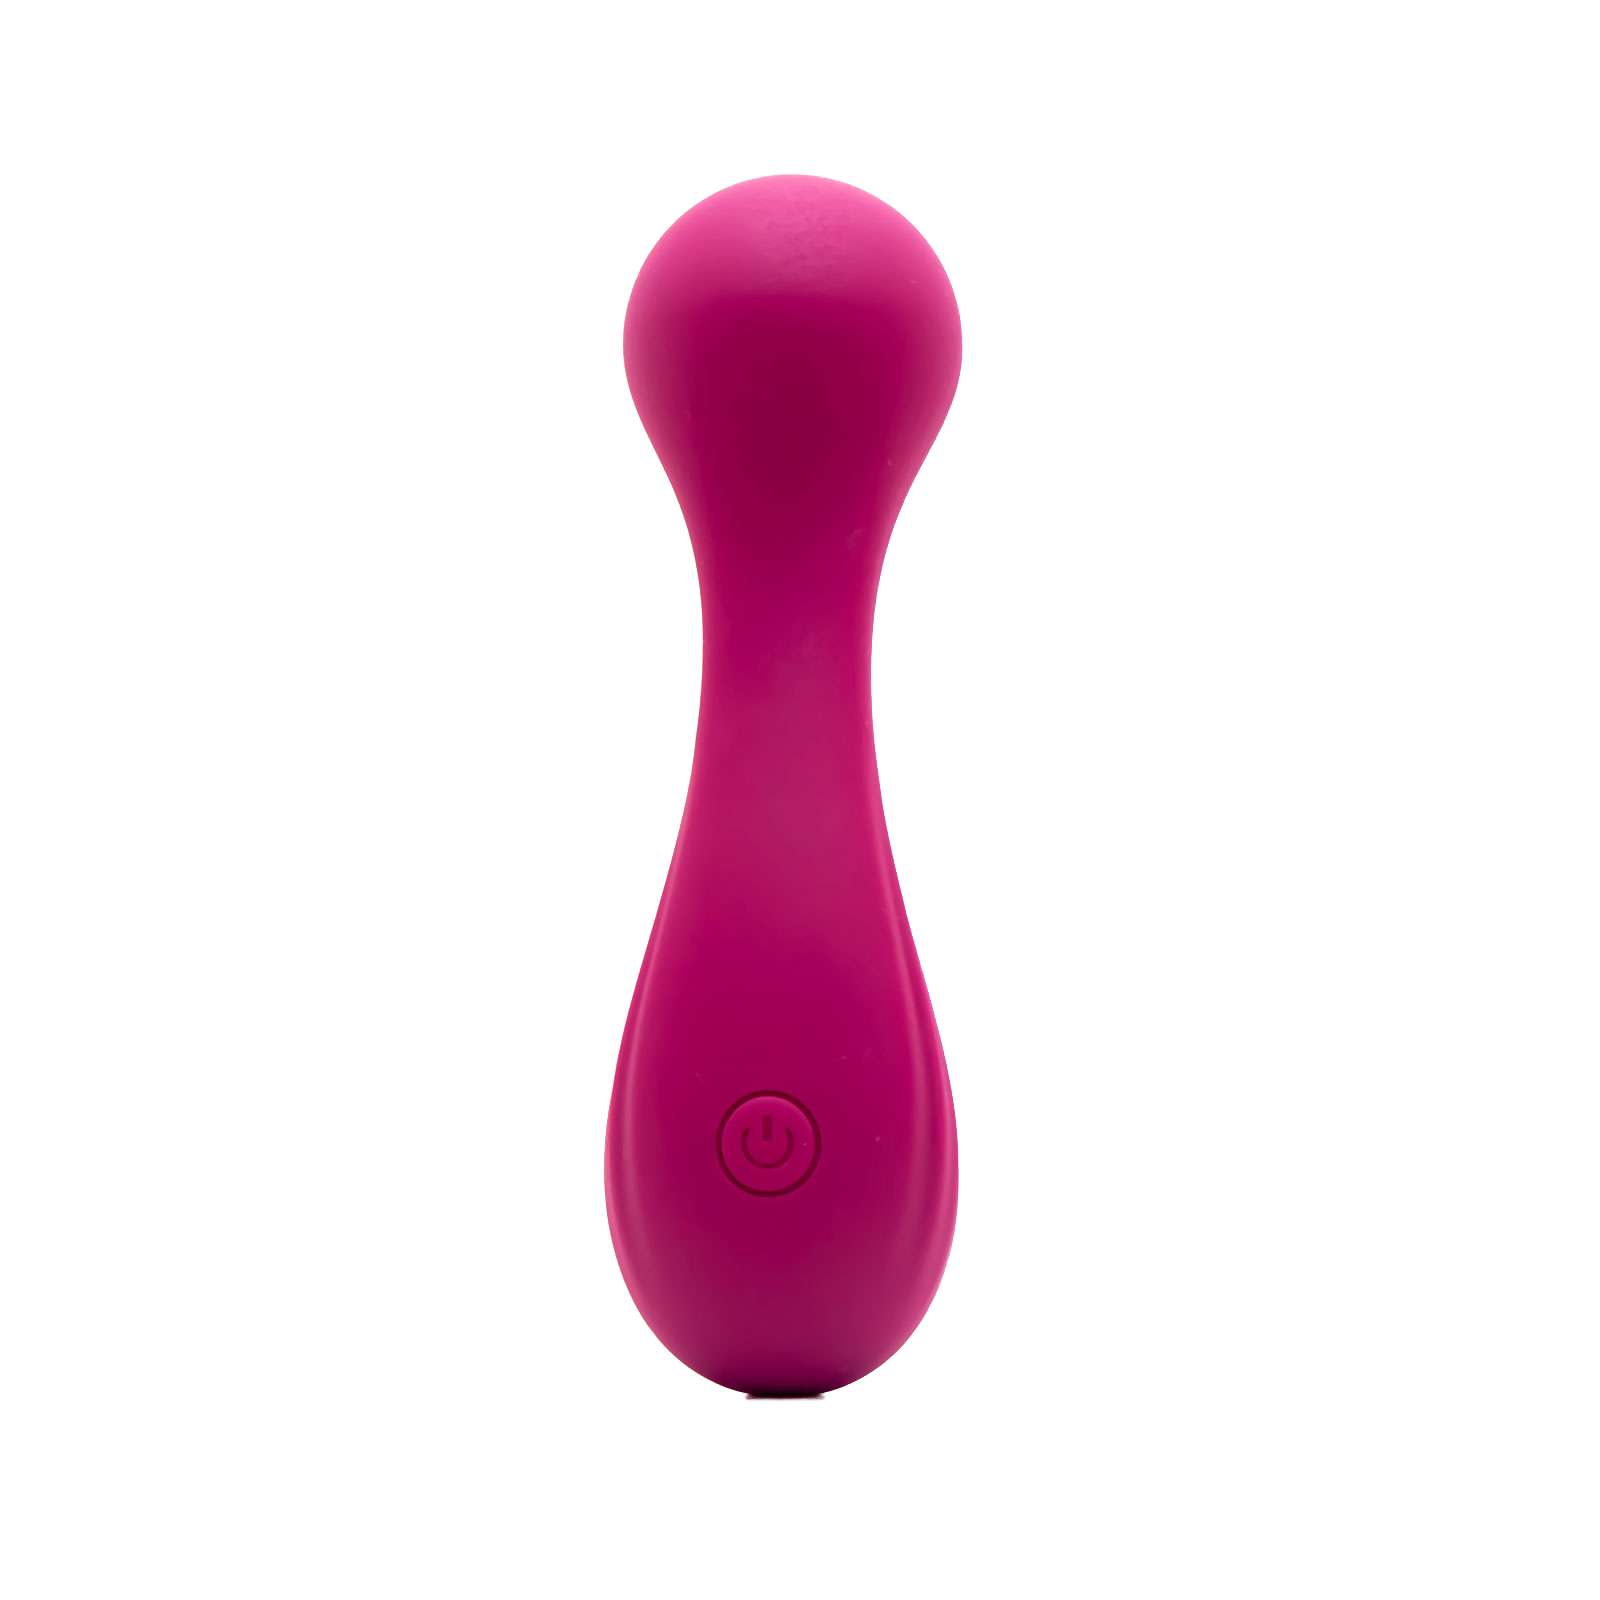 "WENDY" Liquid Silicone Flexible Wand Massager